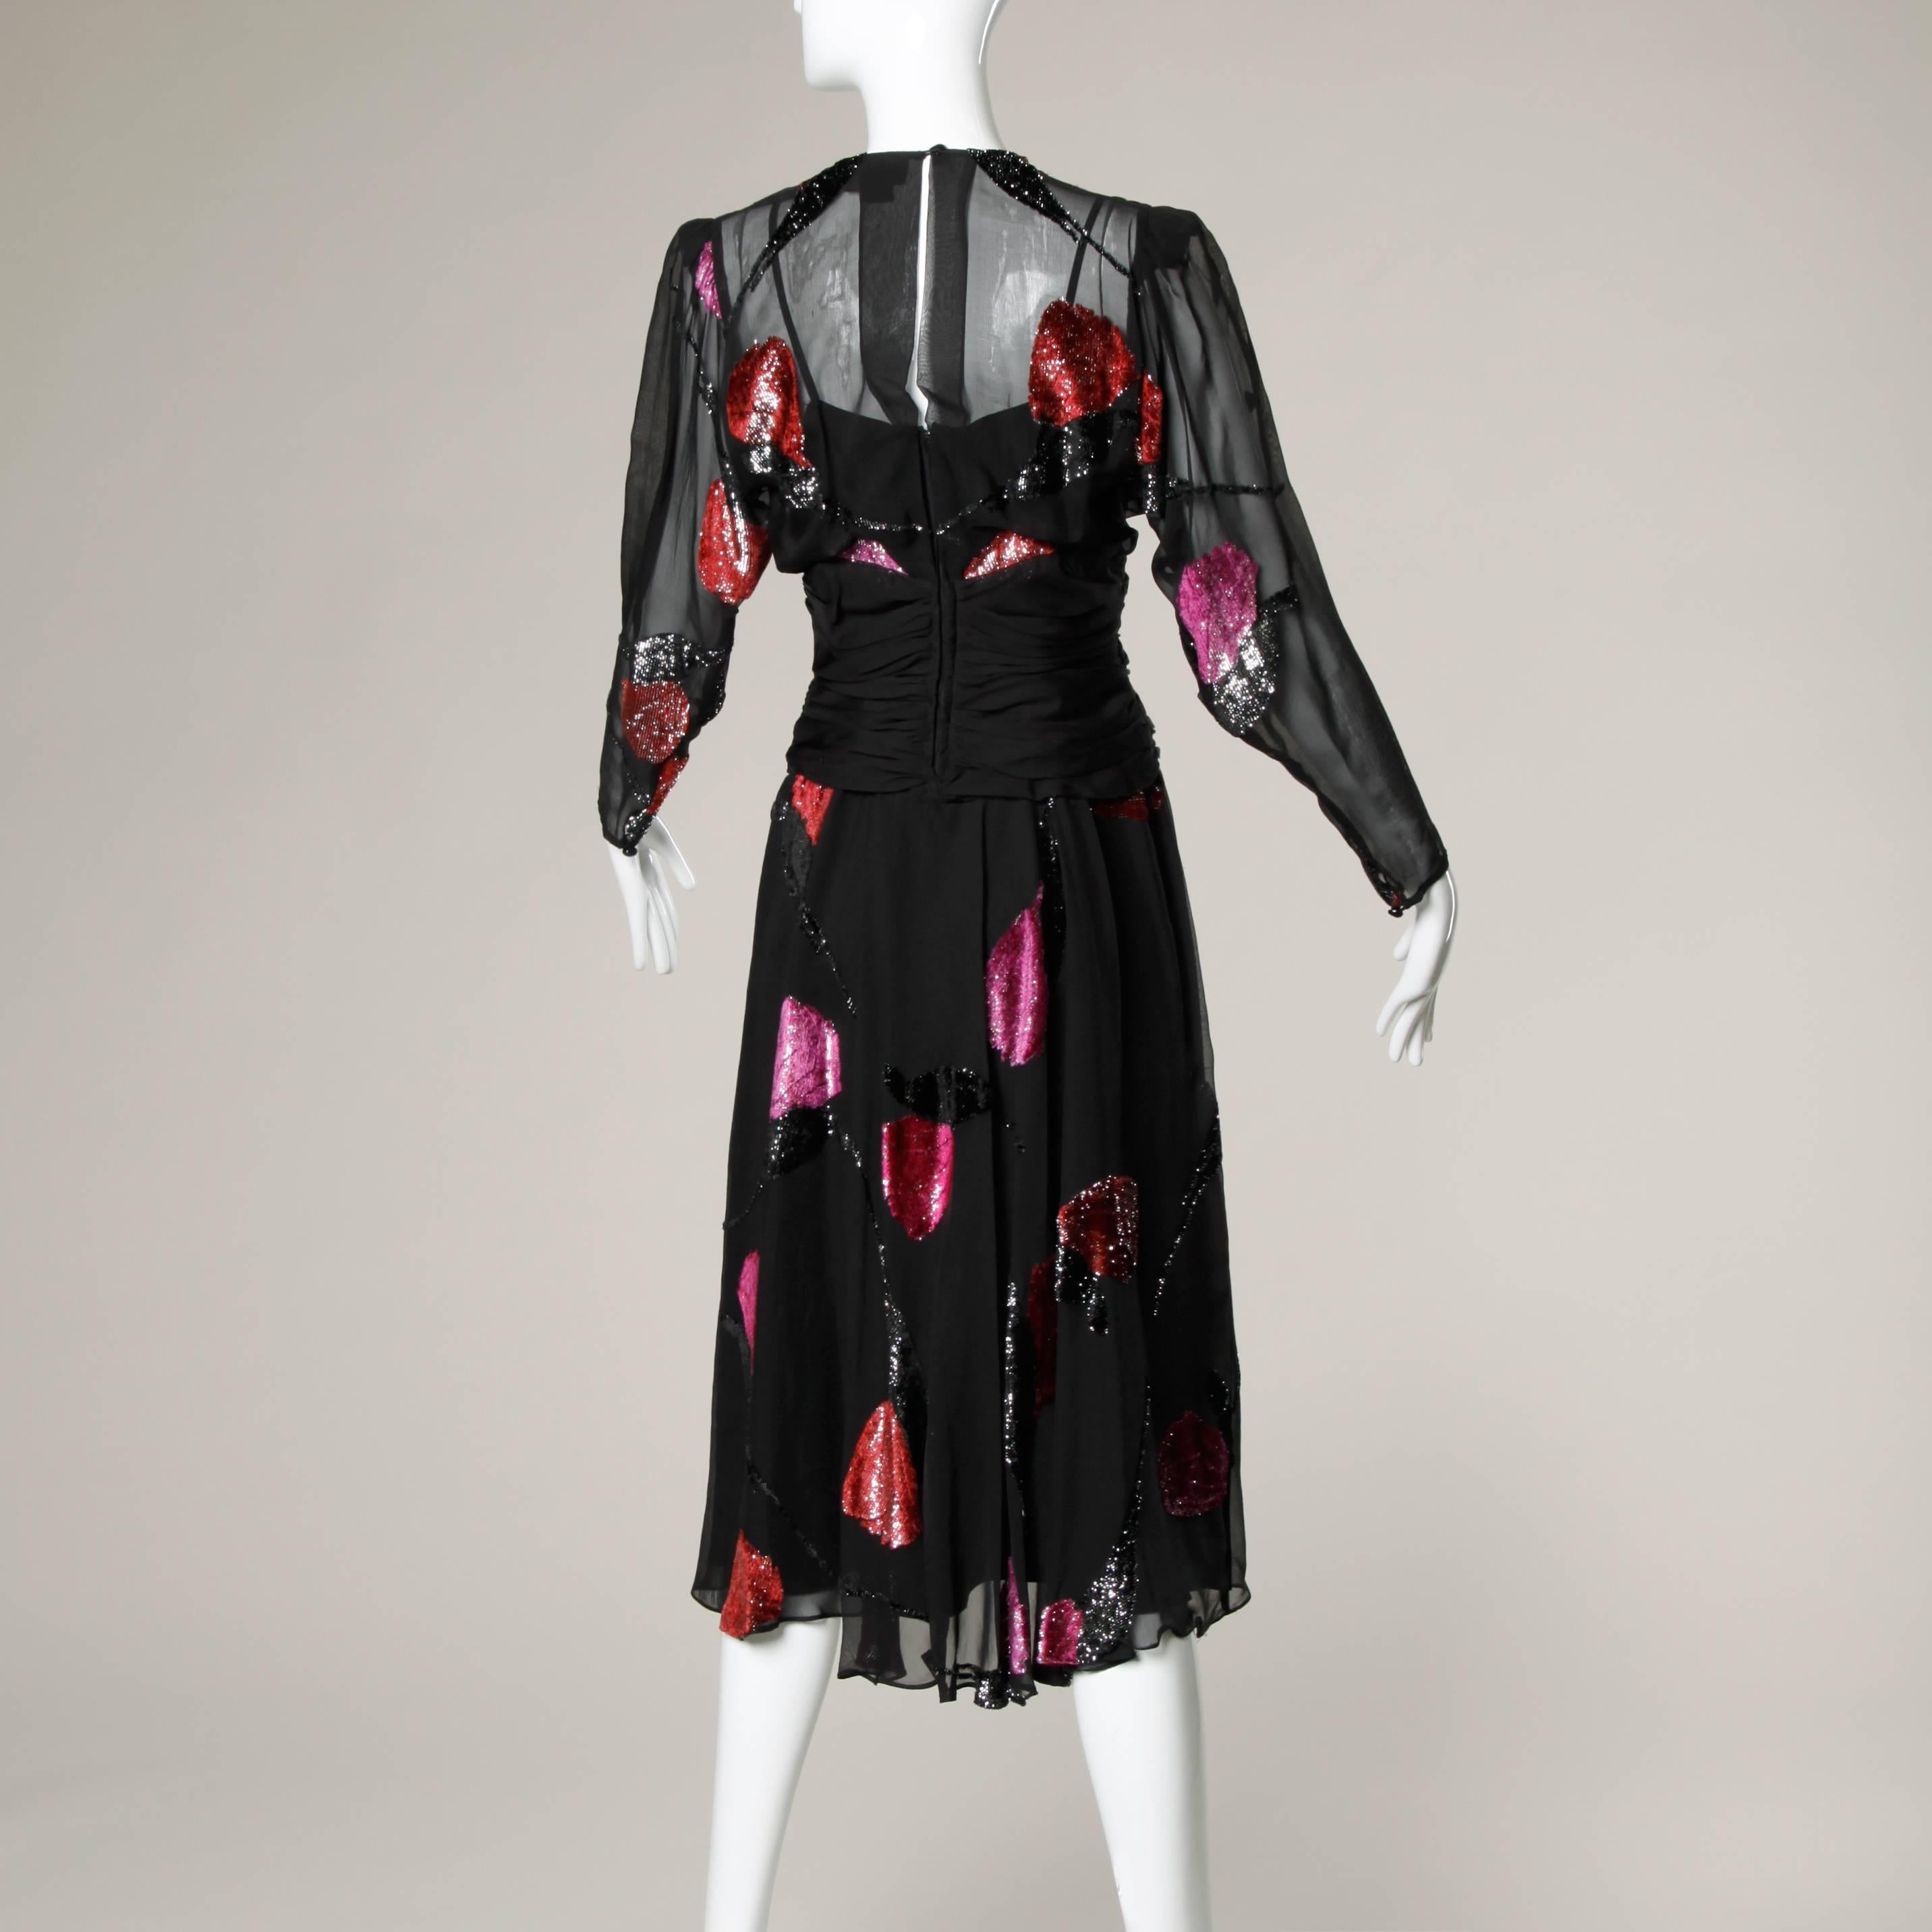 Beautiful delicate silk chiffon dress with a metallic burn out velvet floral design.

Details:

Partially Lined
Back Zip and Button Closure 
Marked Size: US 6
Estimated Size: Small
Color: Black/ Pink/ Red/ Silver Metallic 
Fabric: 100% Silk